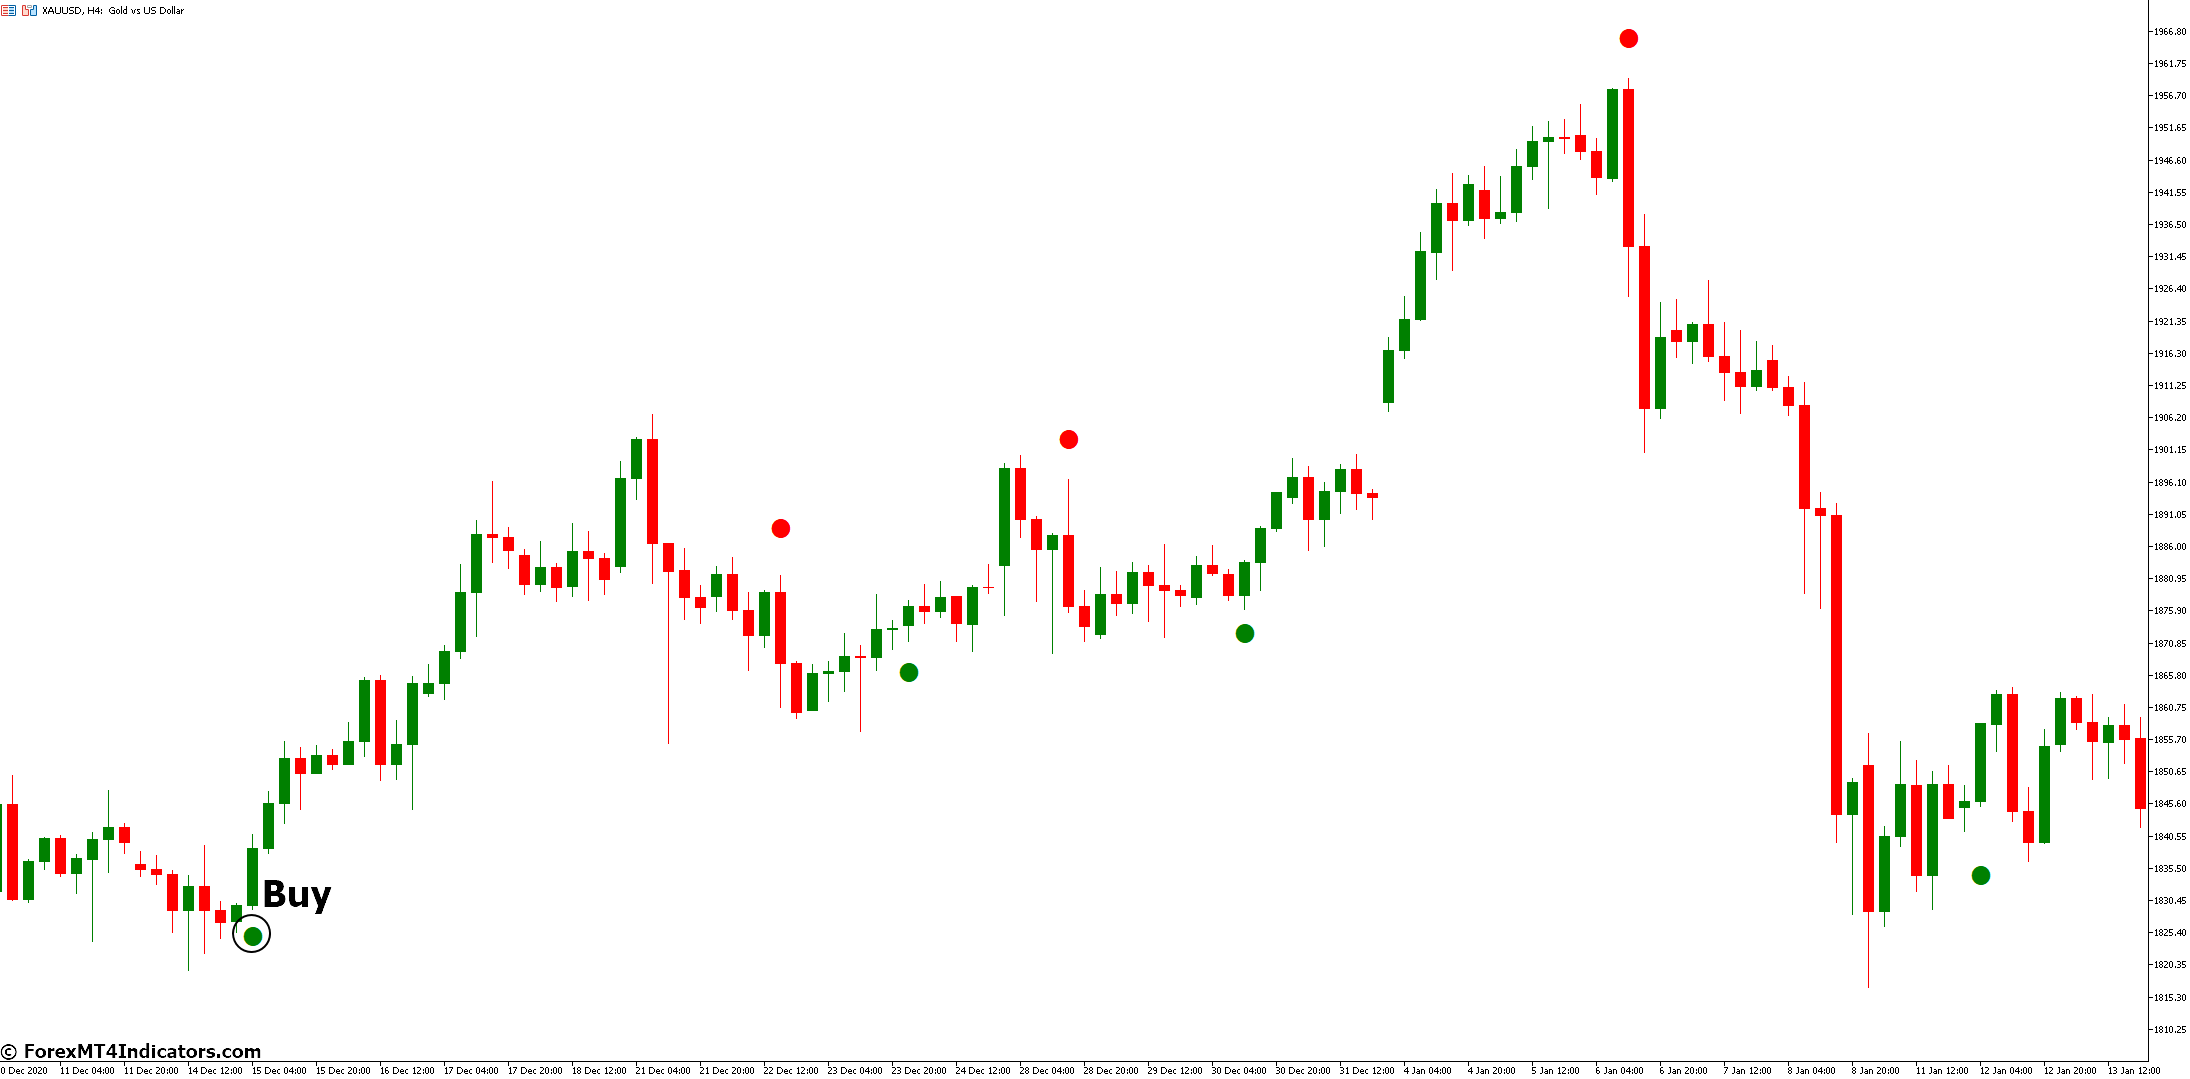 How to Trade with Silver Trend Signal Indicator - Buy Entry